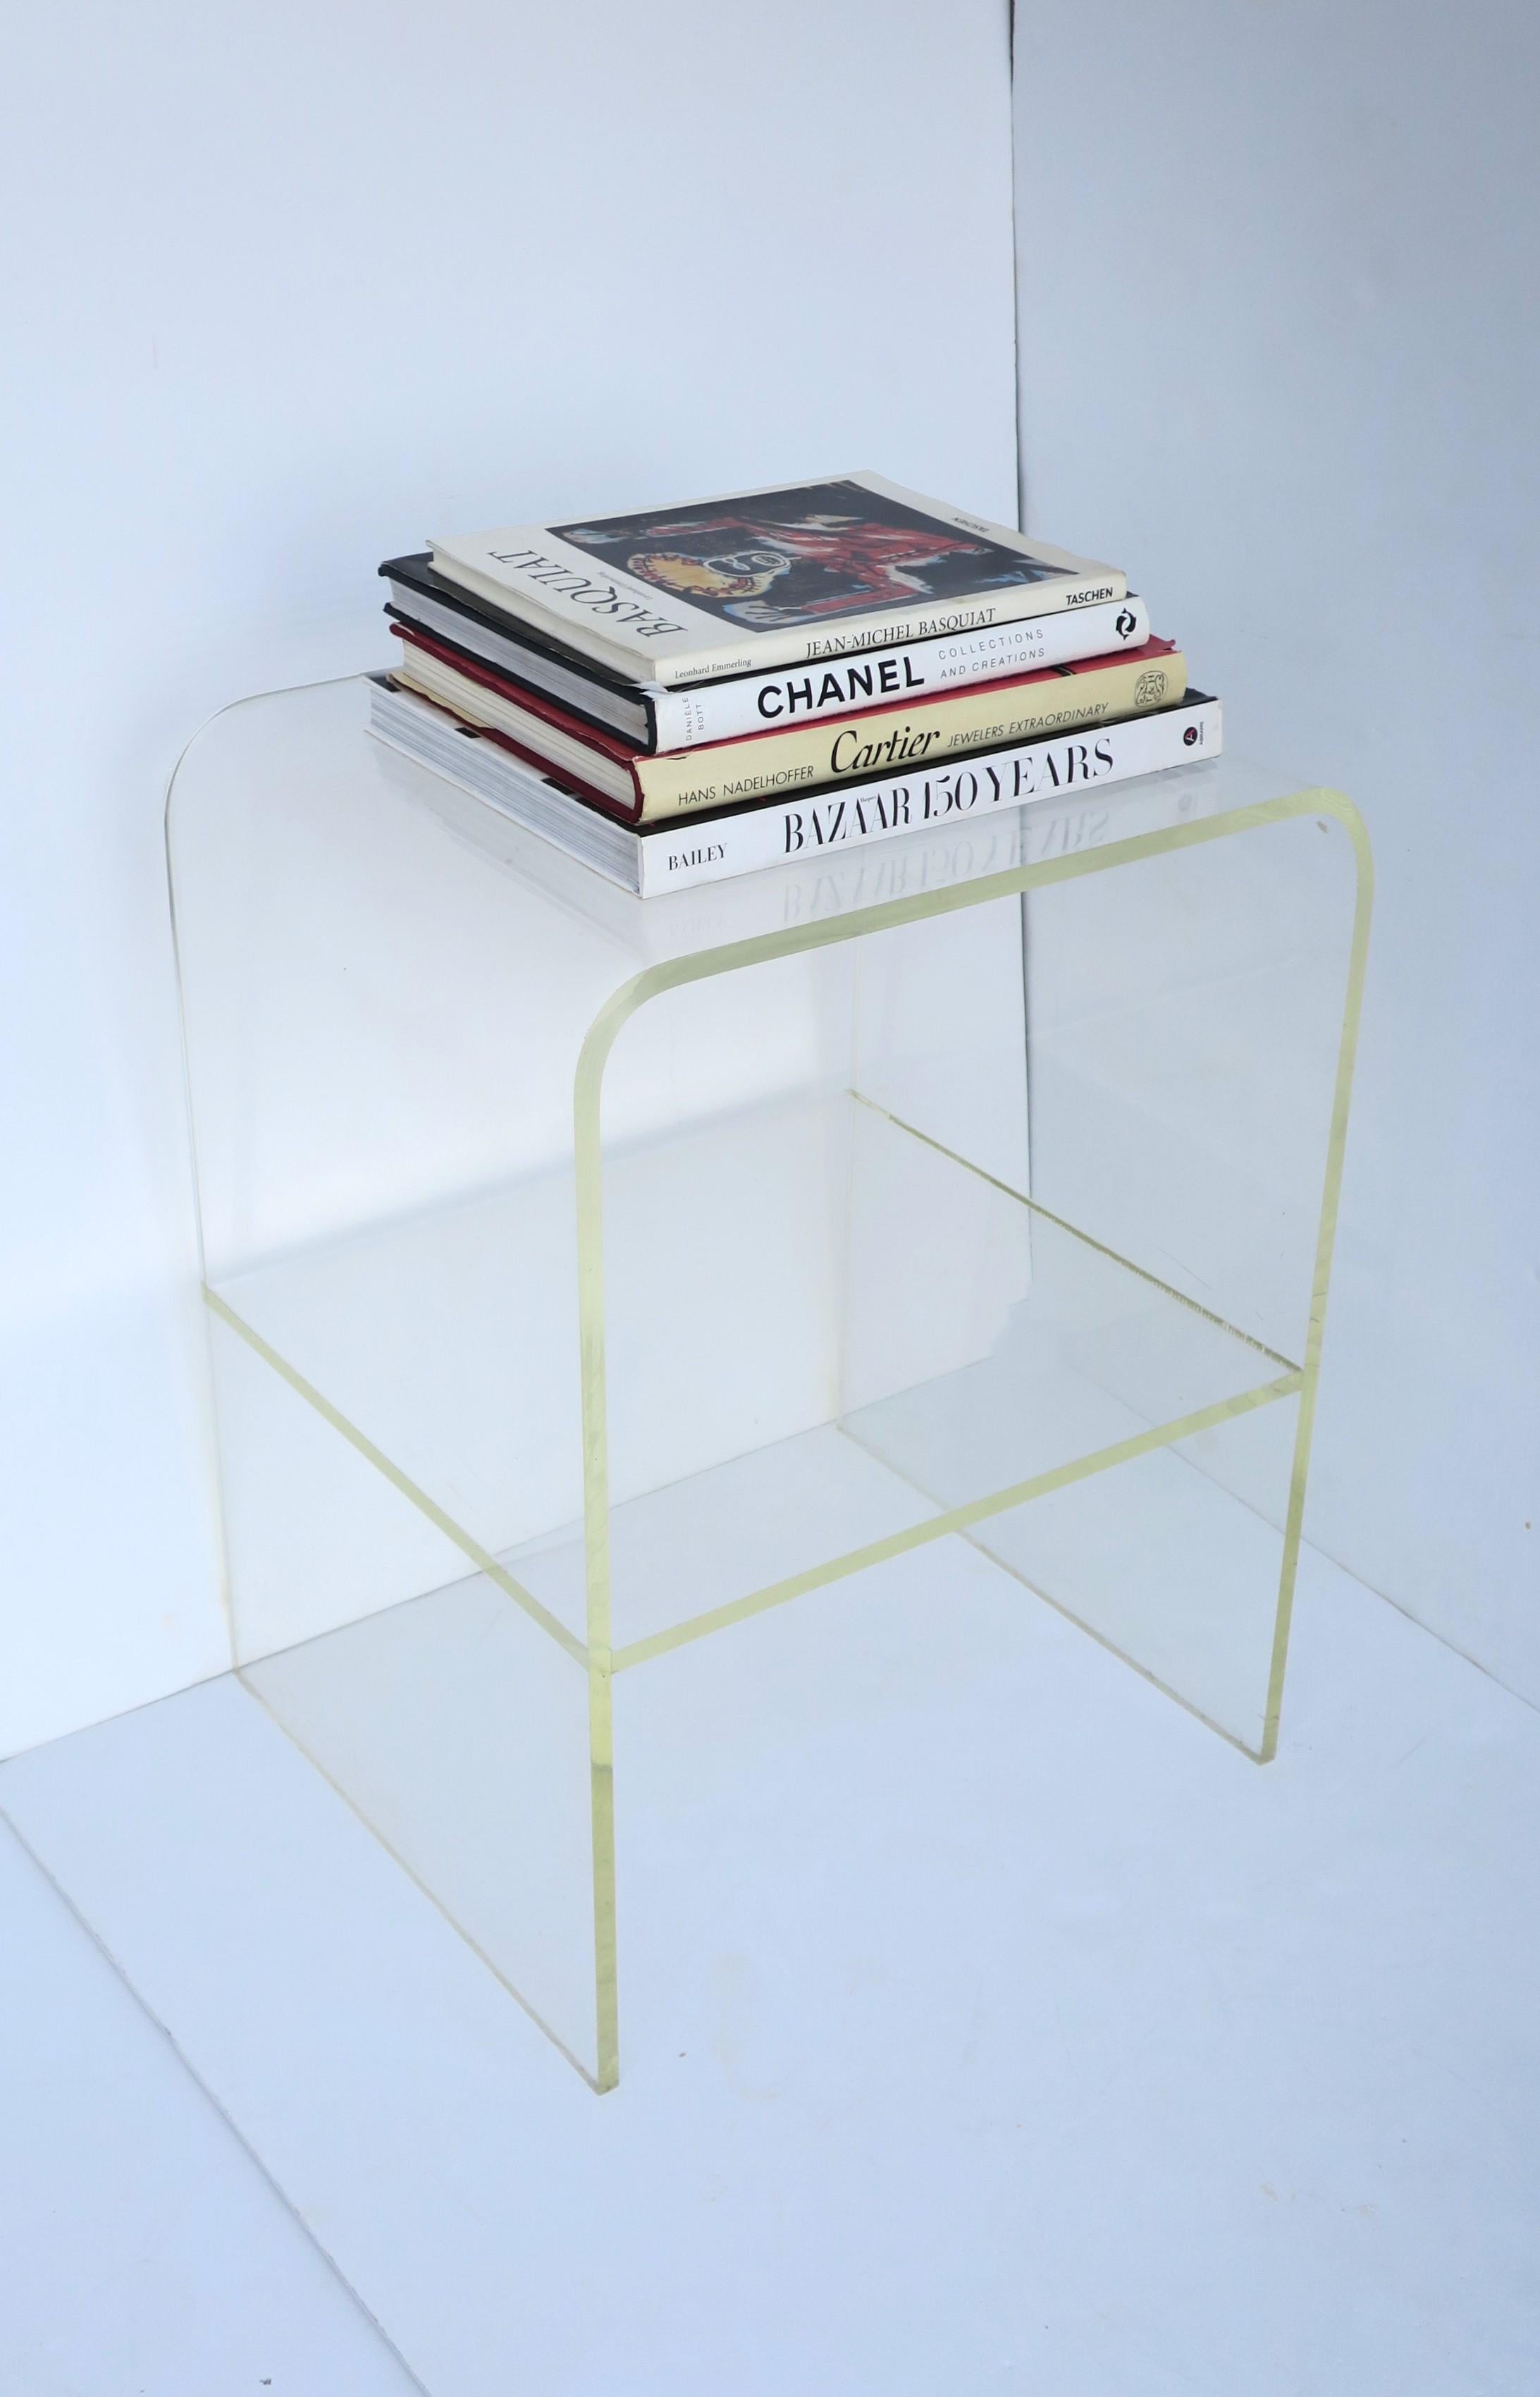 A substantial and well-made Lucite end table with storage shelf in the Modern style, circa late-20th century. Lucite table has a waterfall edge and storage shelf area. Great as an end table or as a storage piece in bath area, etc. Many uses.